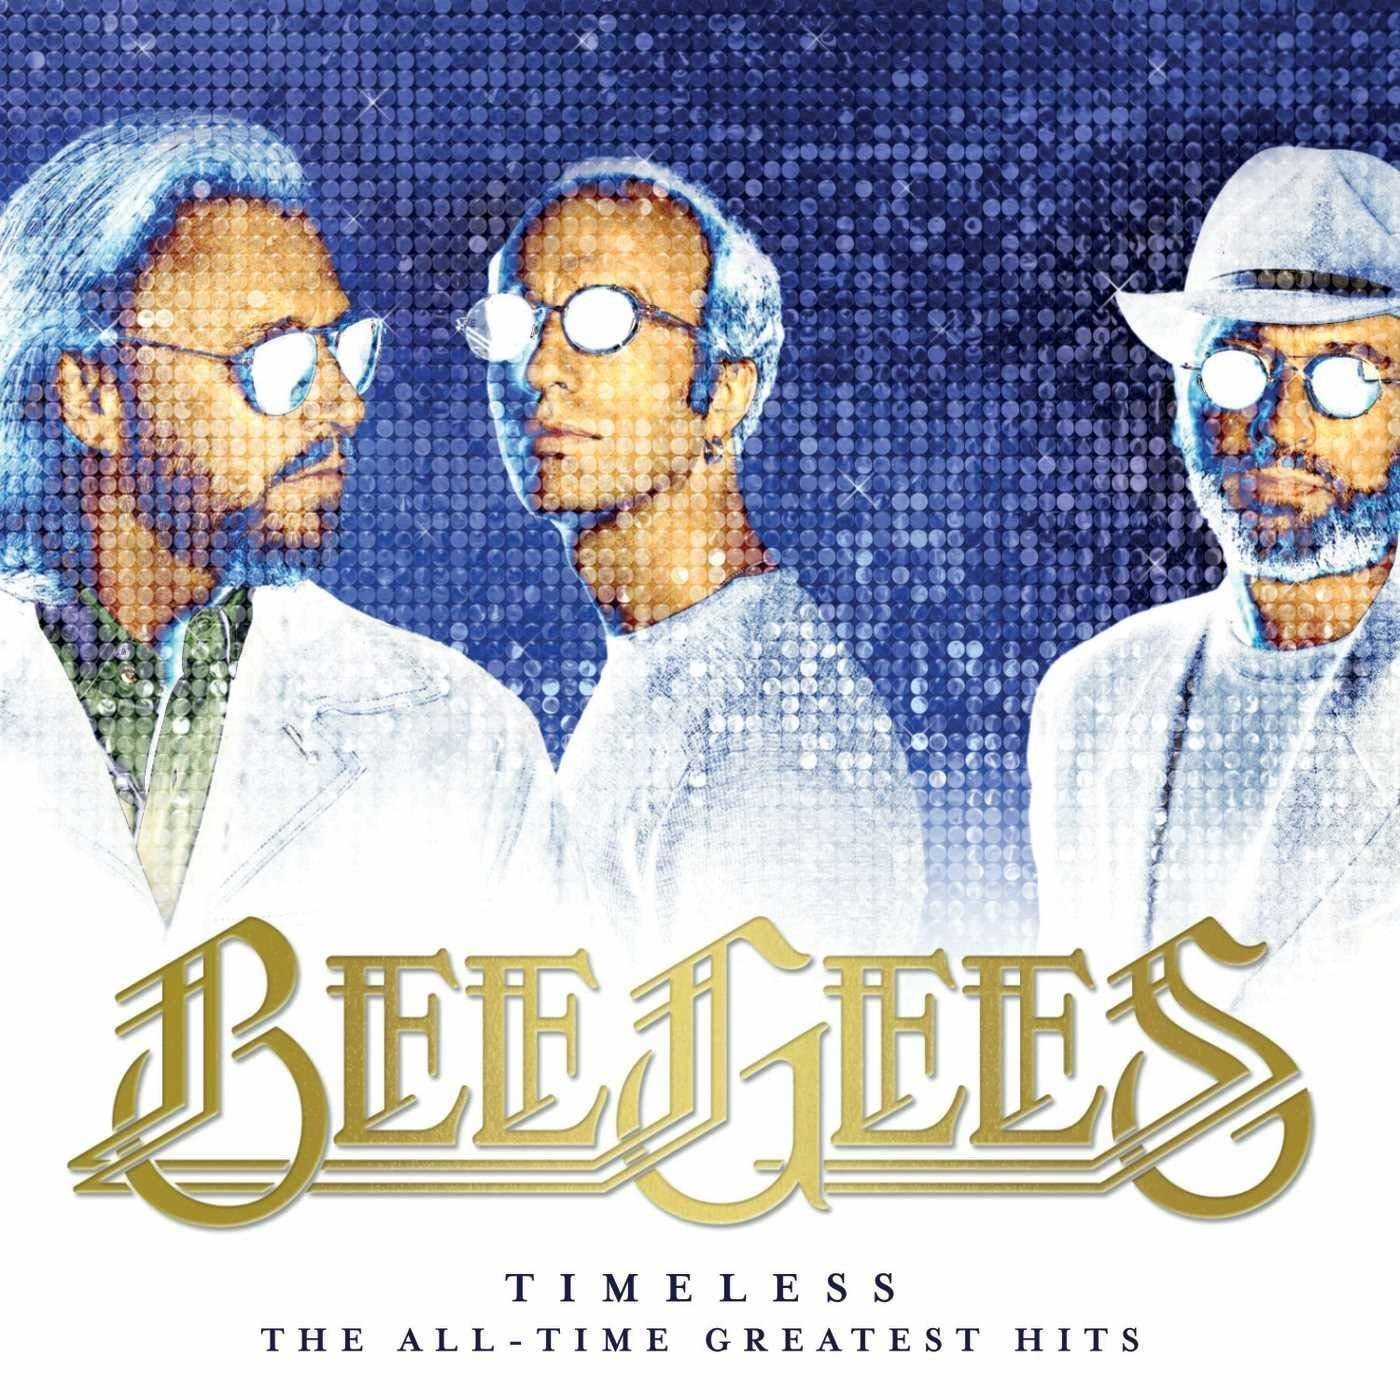 Bee Gees - Timeless - The All-Time (2 LP) Bee Gees